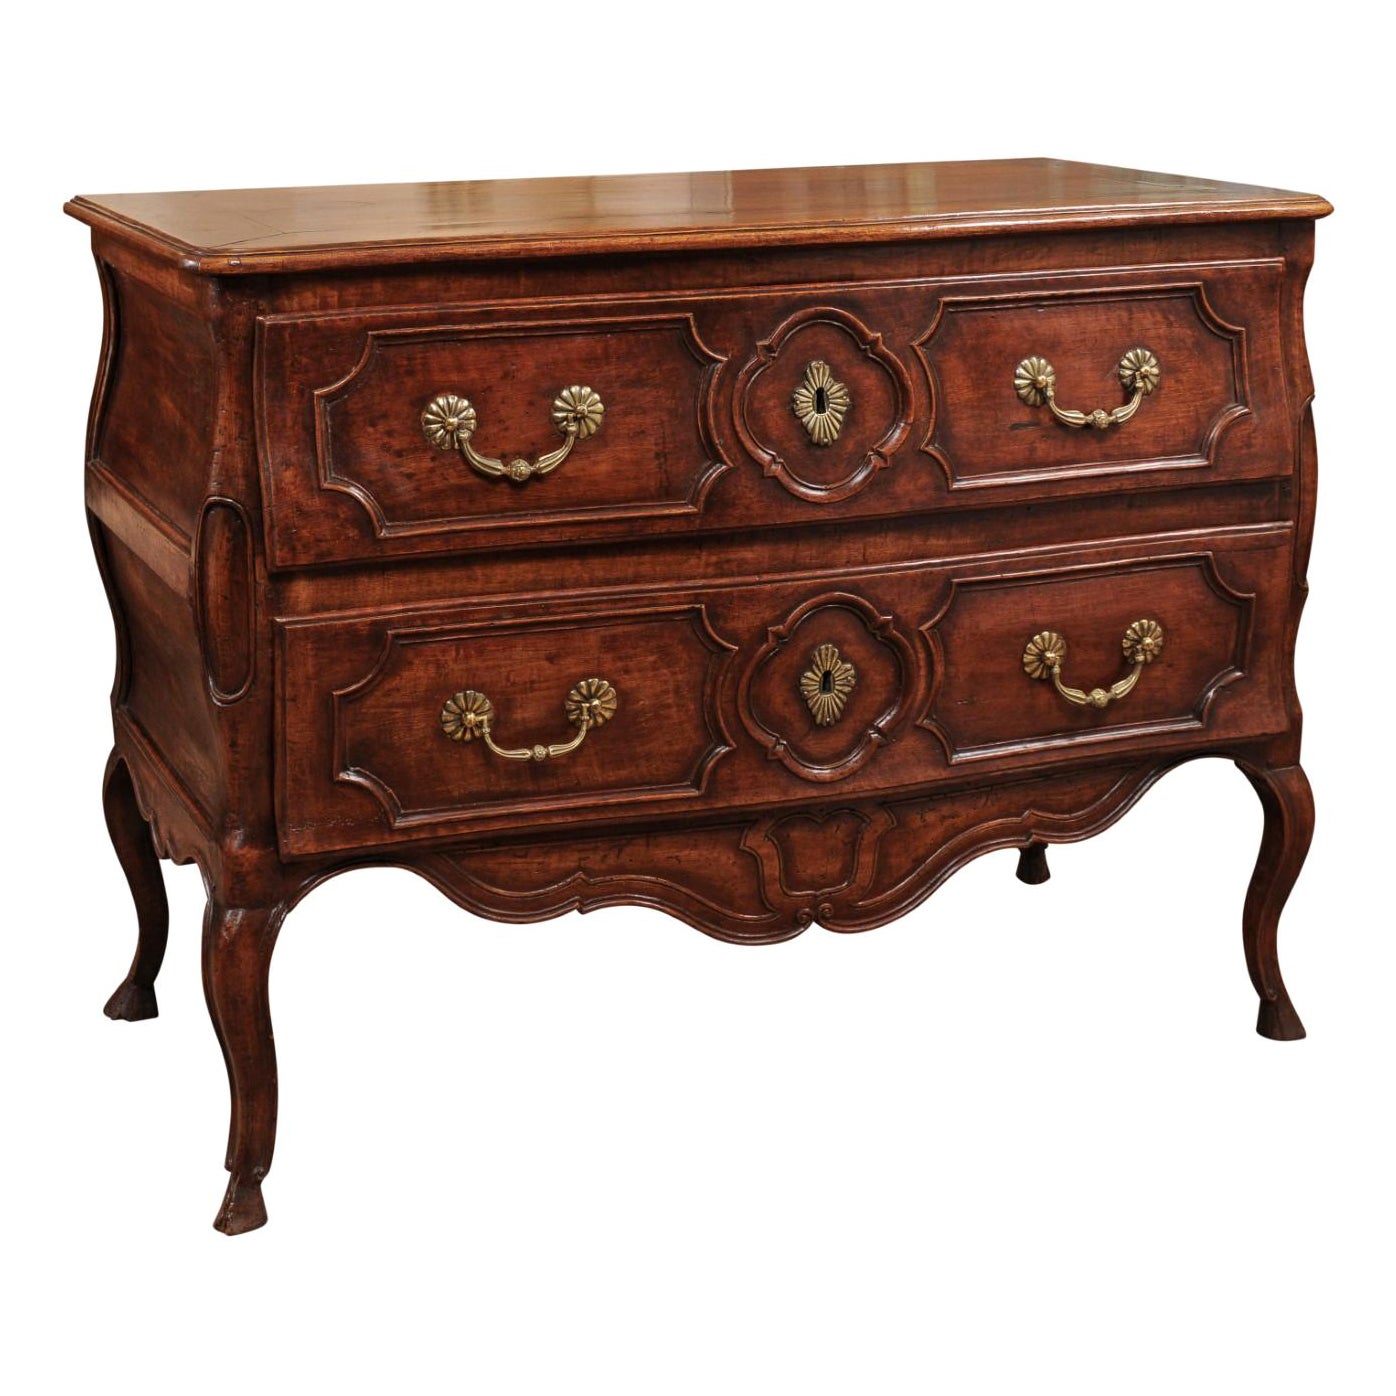 Mid-18th Century French Louis XV Walnut Commode with 2 Drawers, Cabriole Legs, &